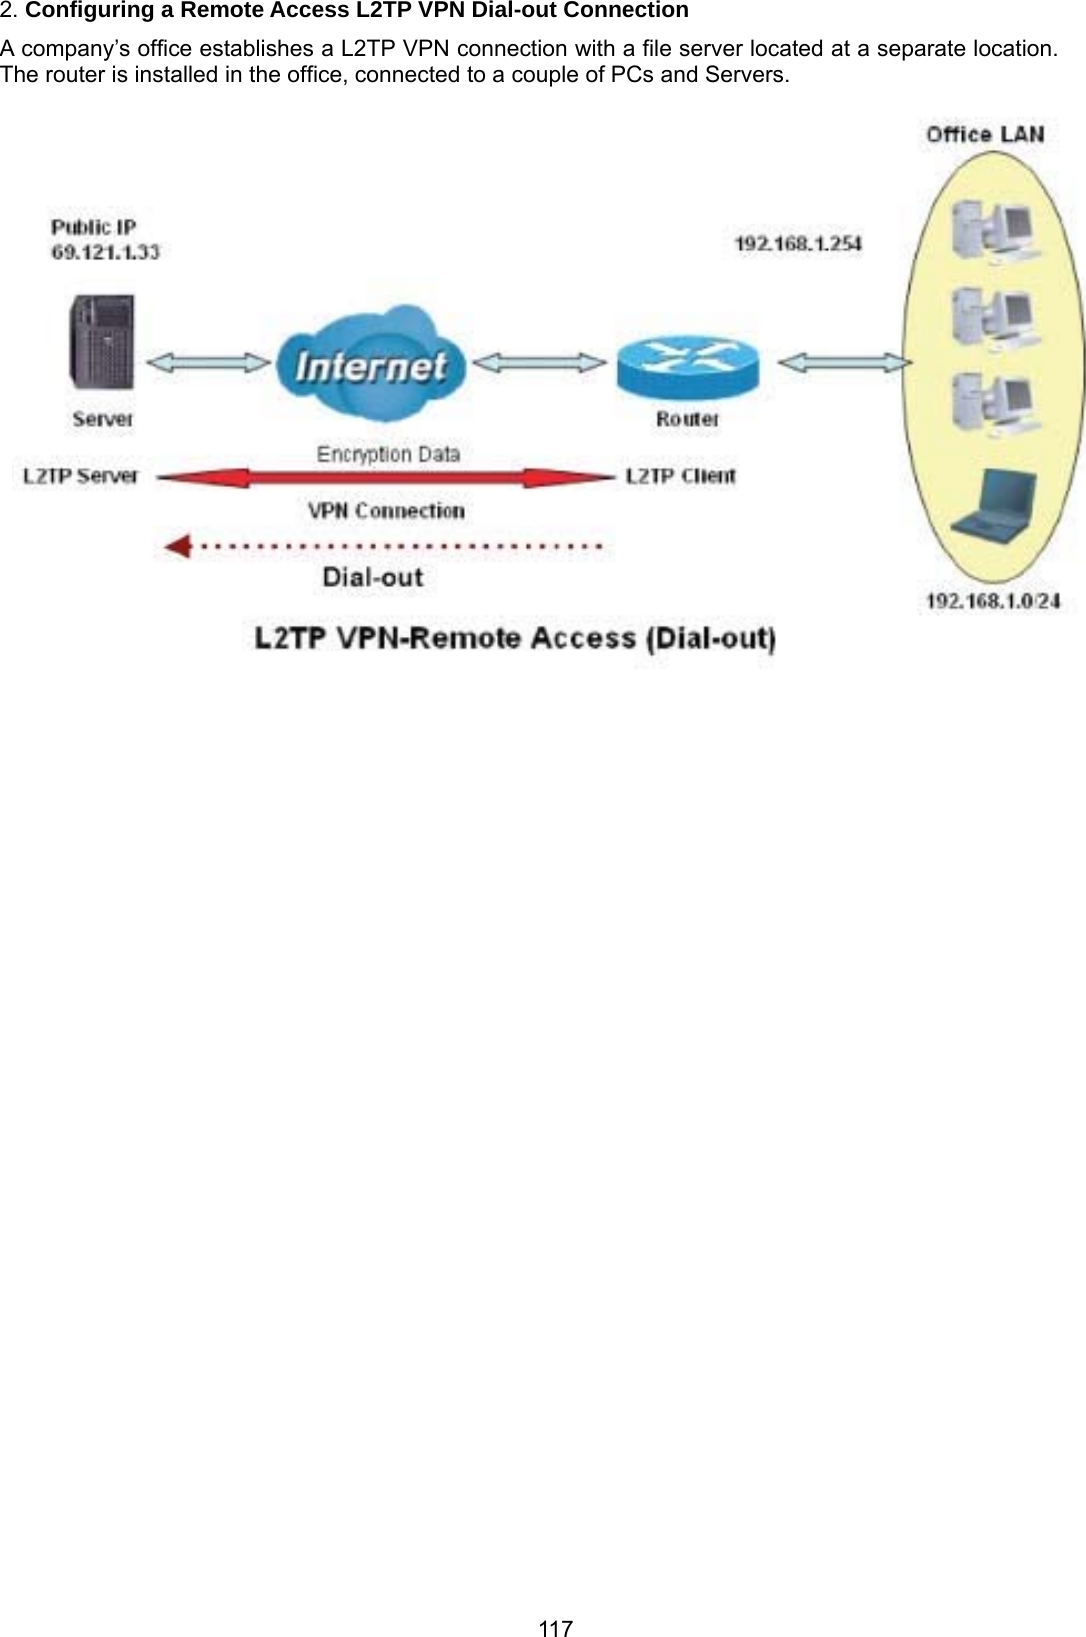 117 2. Configuring a Remote Access L2TP VPN Dial-out Connection A company’s office establishes a L2TP VPN connection with a file server located at a separate location. The router is installed in the office, connected to a couple of PCs and Servers.  